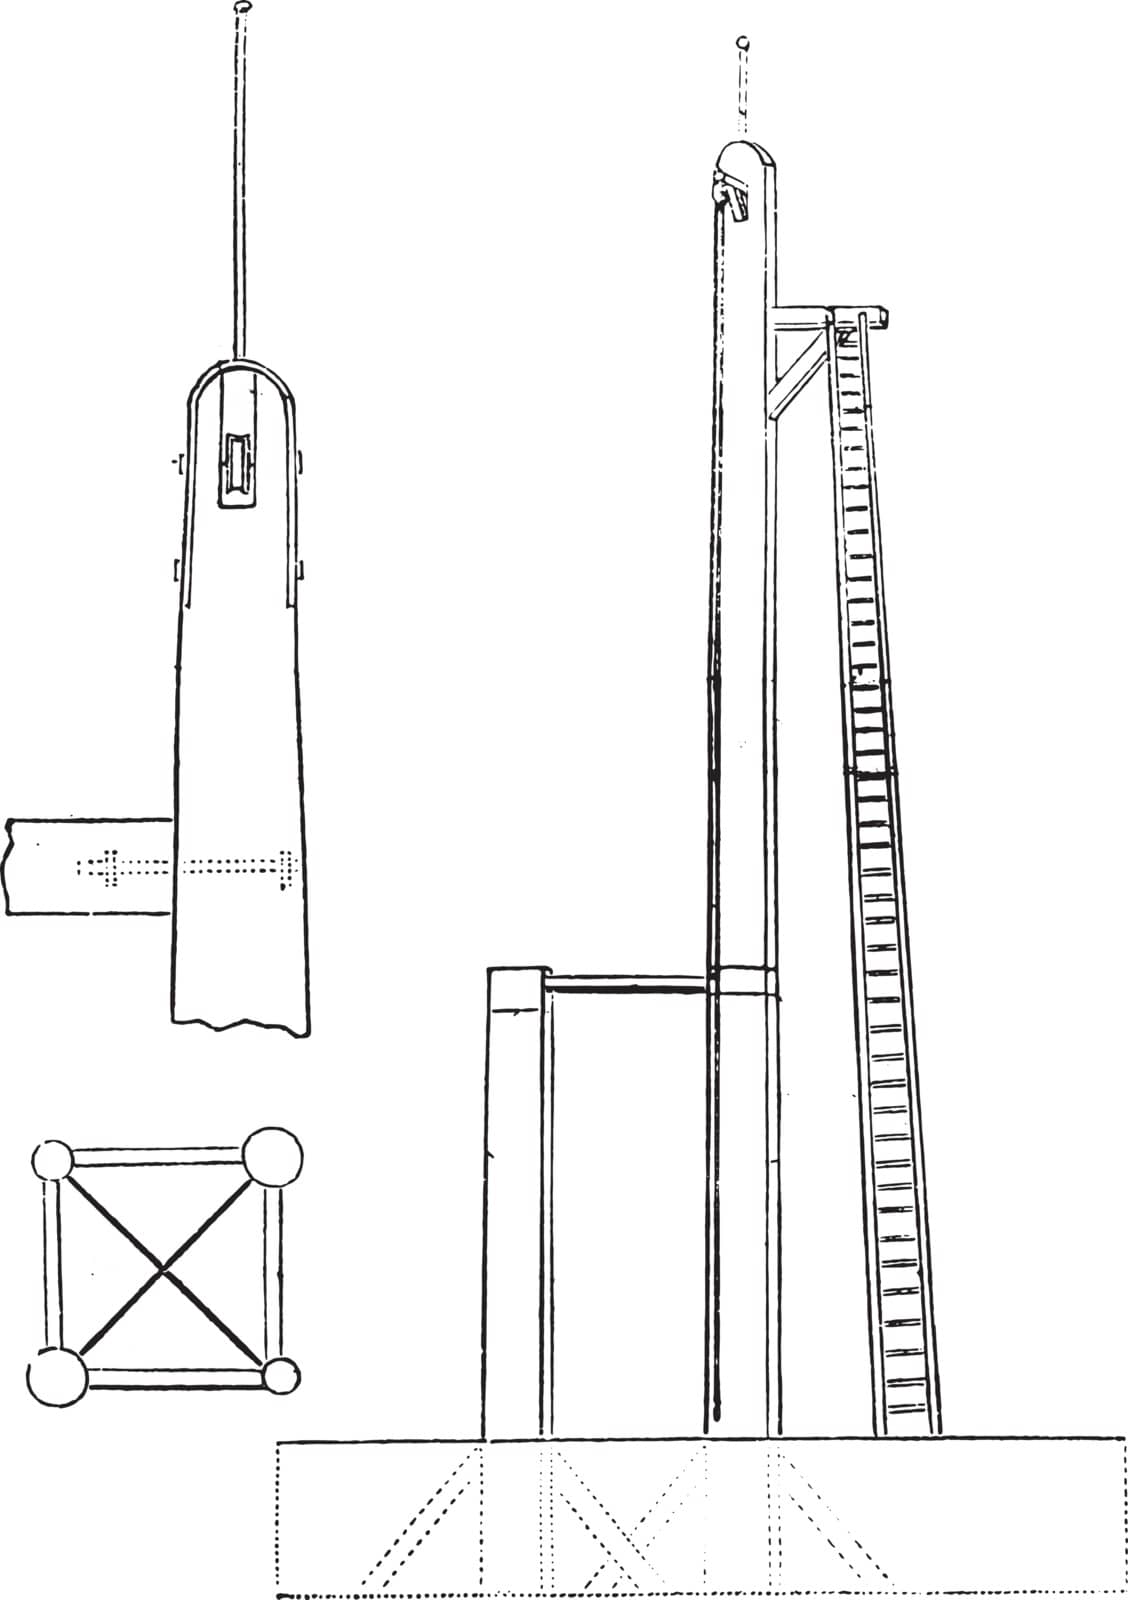 11. Mat connects vertical gantry, 12. Head of the vertical mast, by Morphart